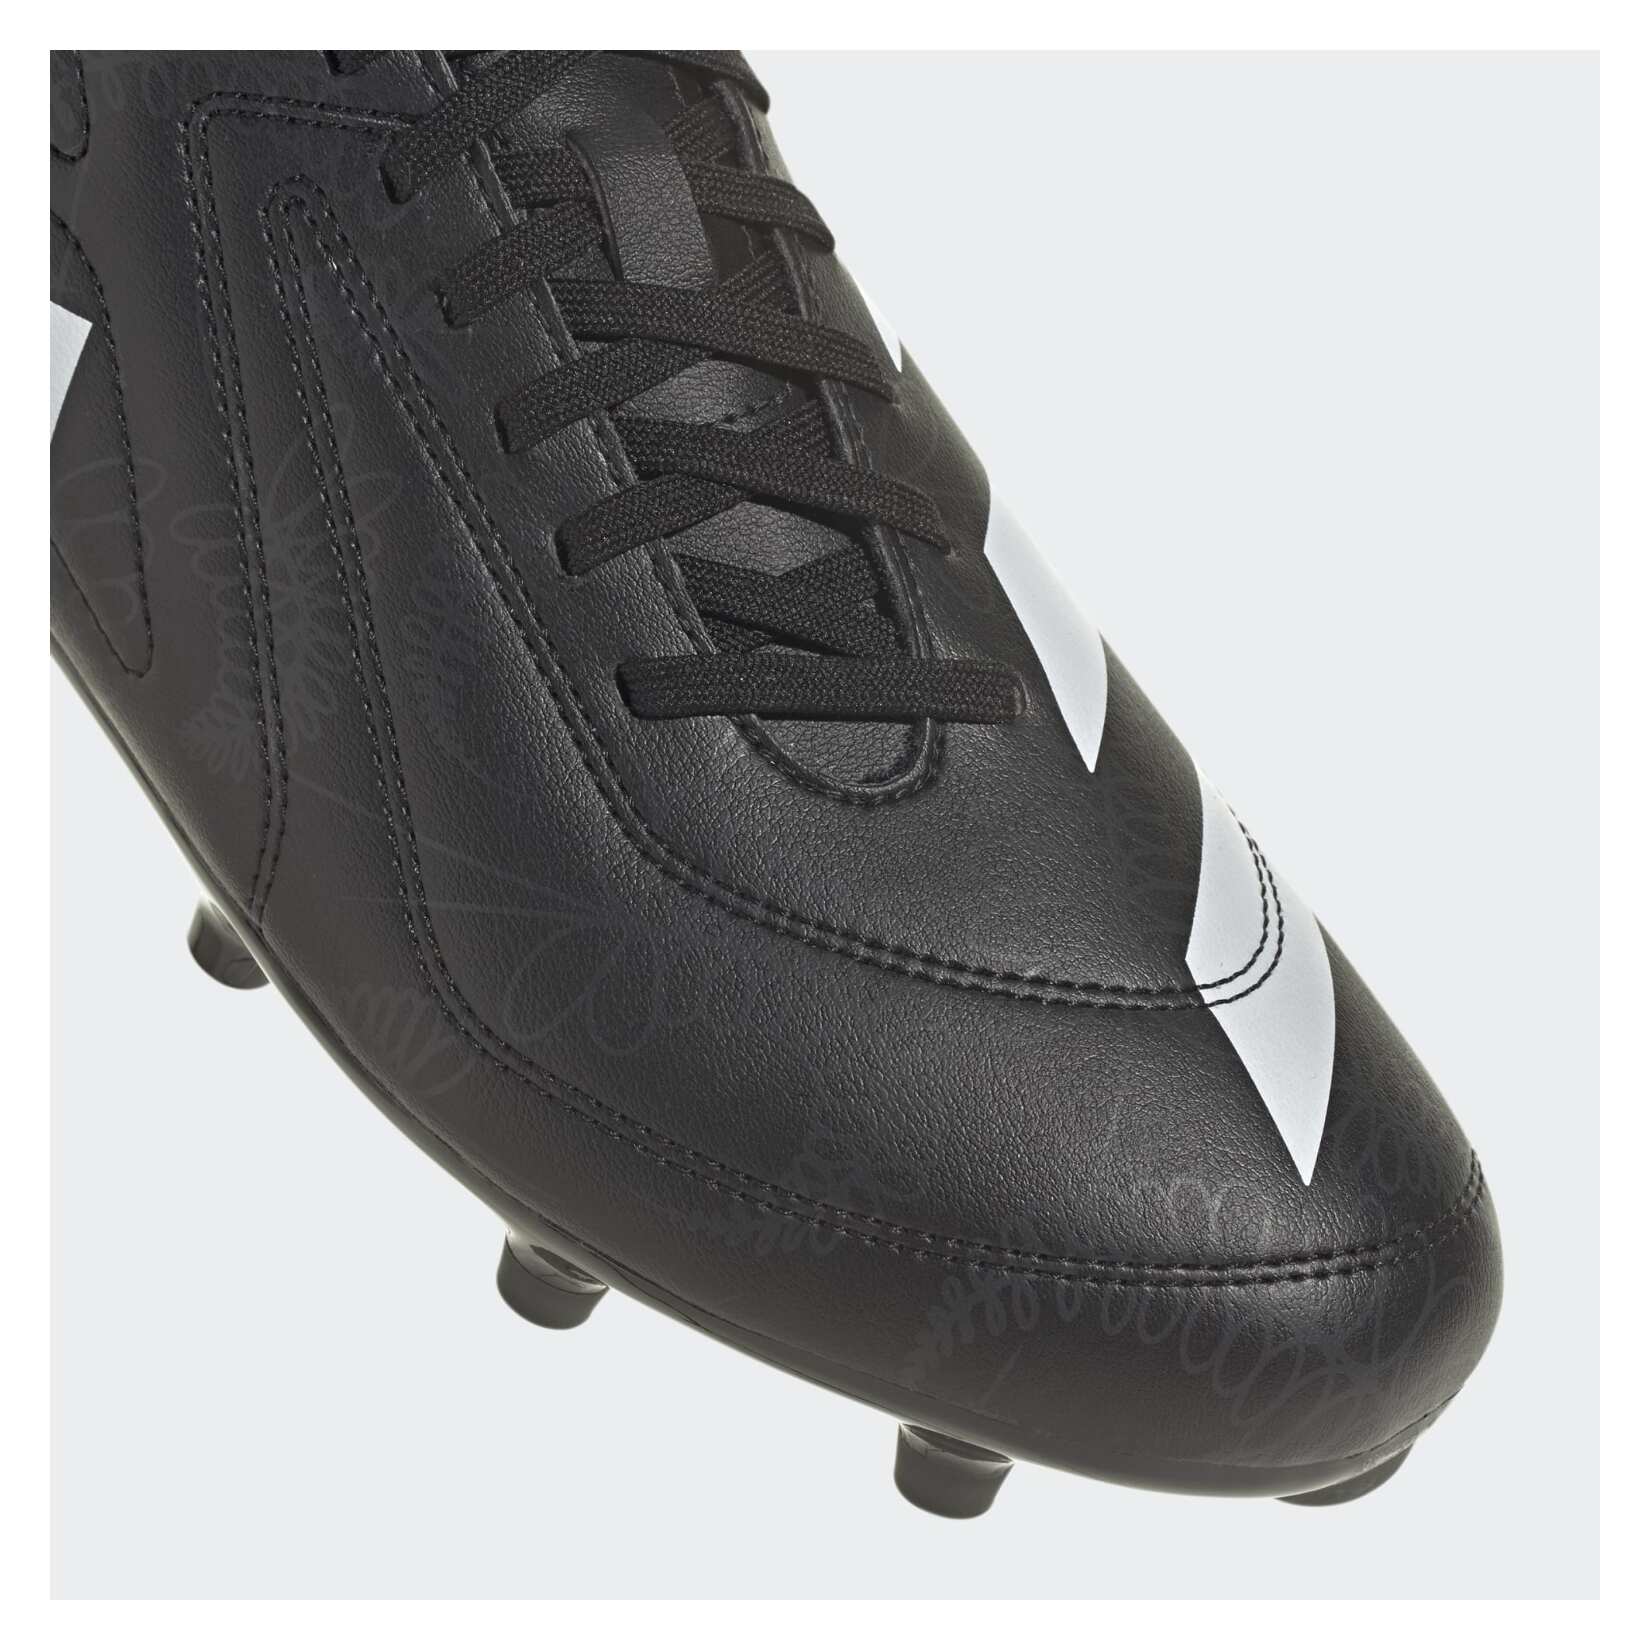 adidas-LP RS-15 Firm Ground Rugby Boots